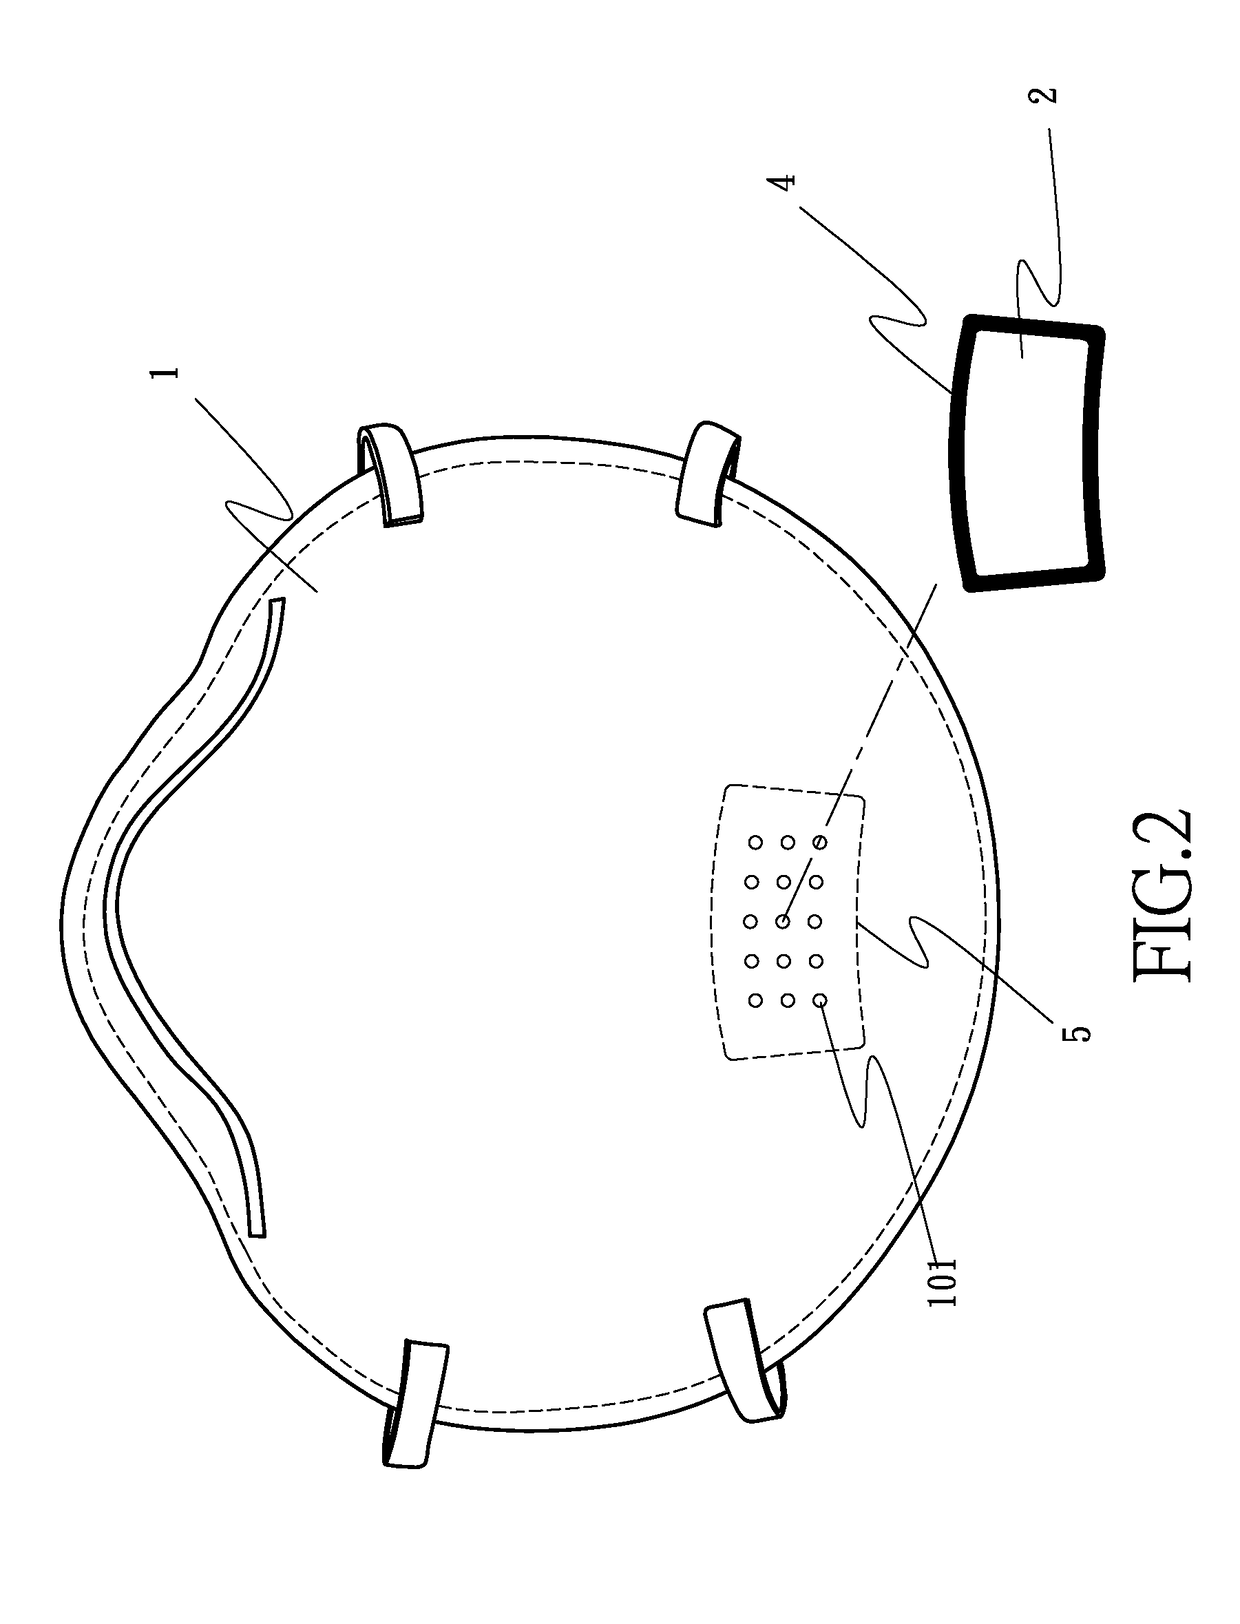 Mask With a Sound-transmitting Structure